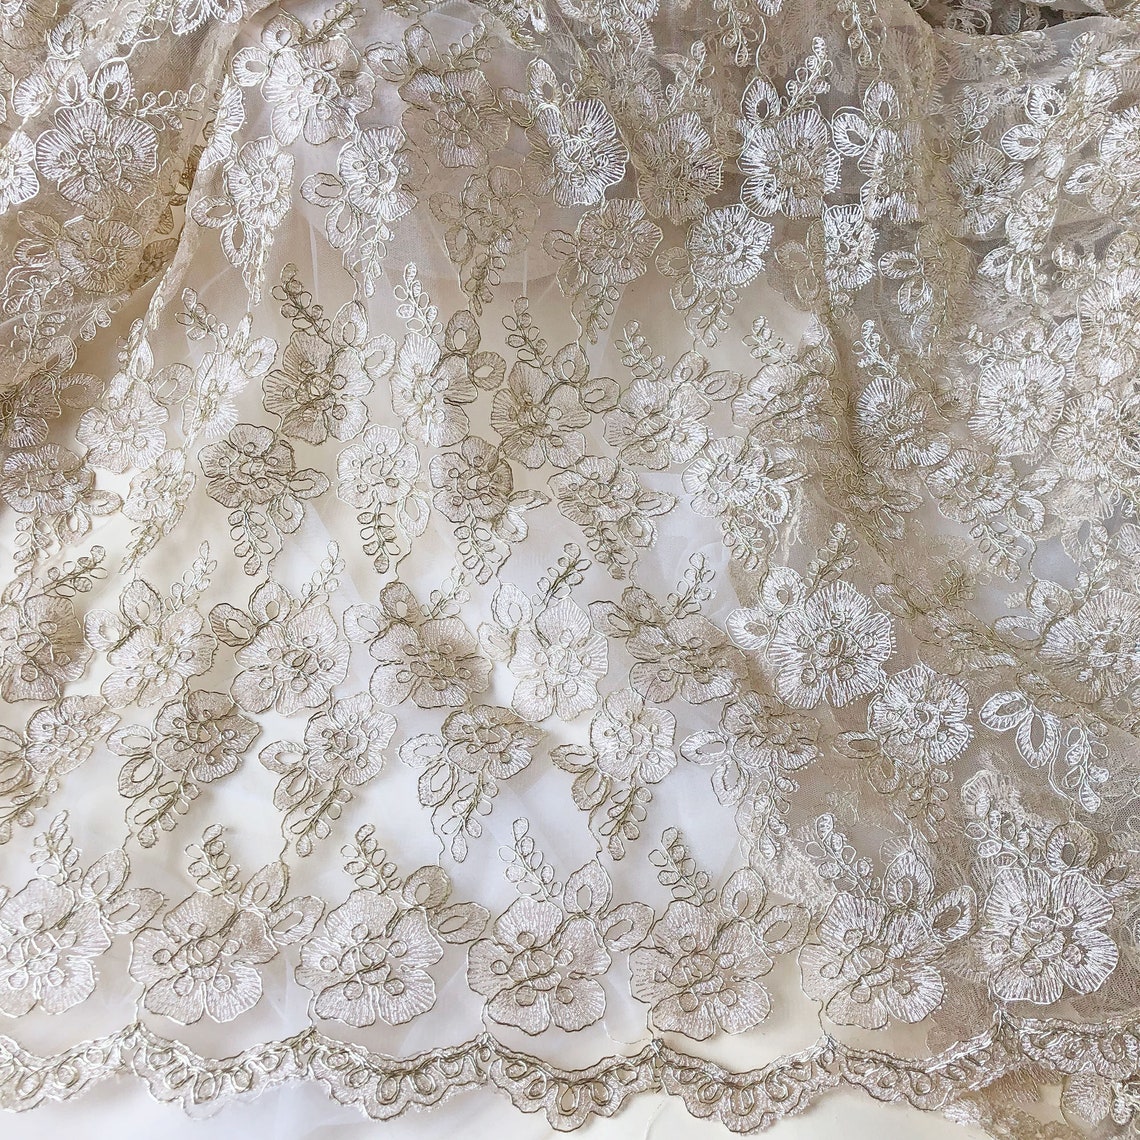 Gold Corded Embroidery Wedding Tulle Lace Fabric Matte Gold | Etsy